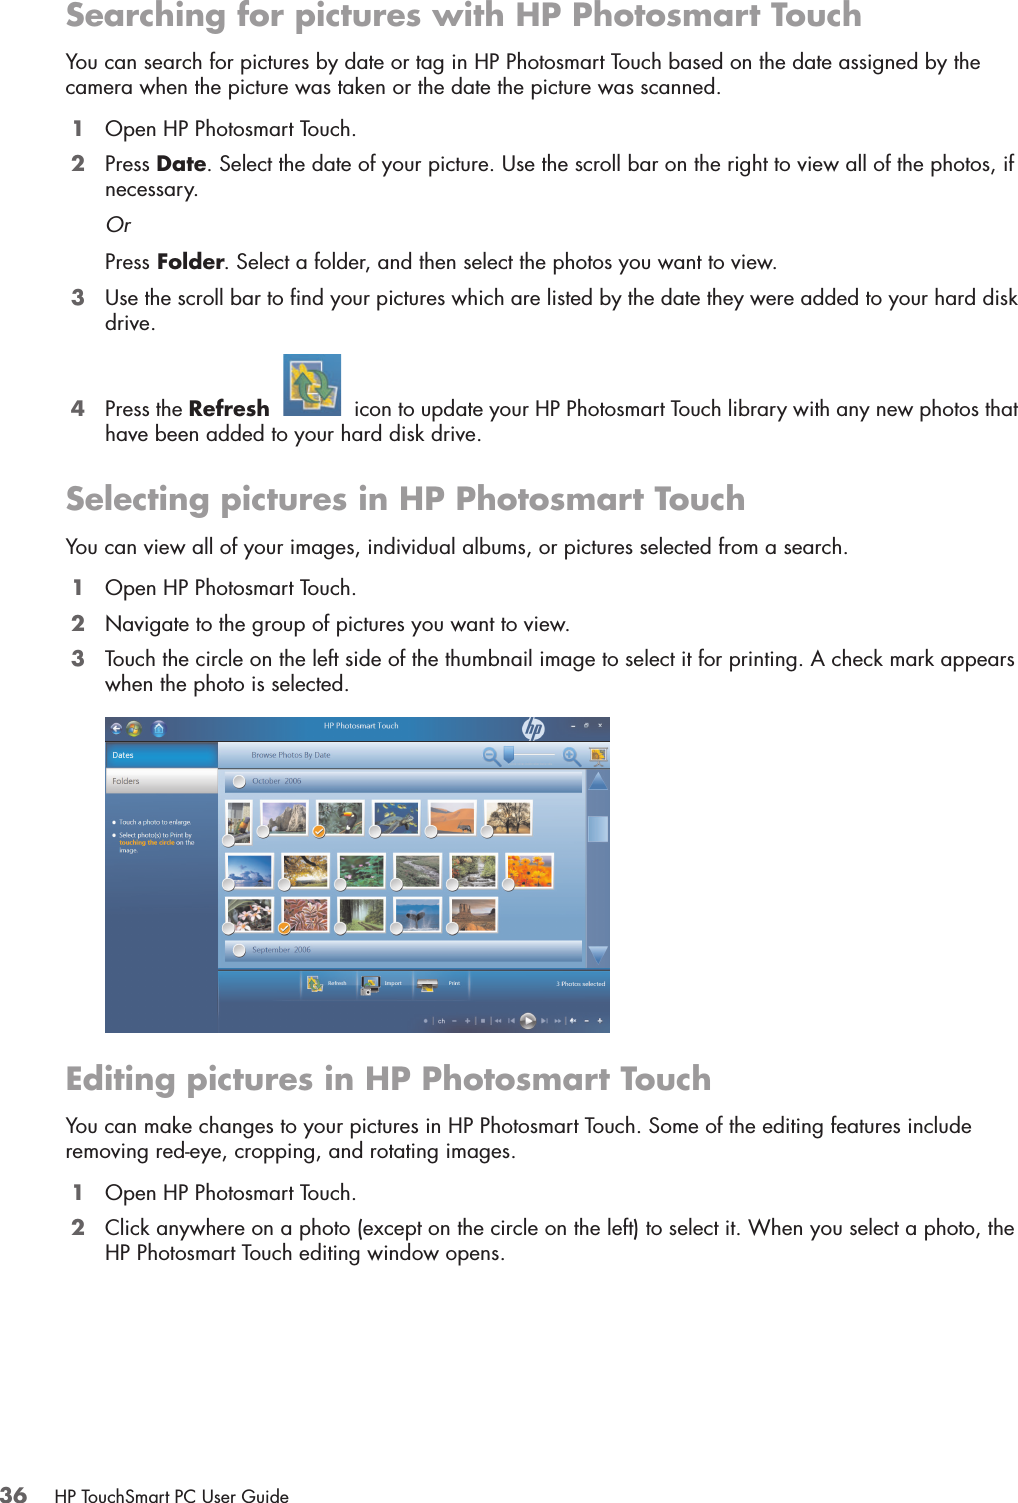 36 HP TouchSmart PC User GuideSearching for pictures with HP Photosmart TouchYou can search for pictures by date or tag in HP Photosmart Touch based on the date assigned by the camera when the picture was taken or the date the picture was scanned.1Open HP Photosmart Touch.2Press Date. Select the date of your picture. Use the scroll bar on the right to view all of the photos, if necessary.OrPress Folder. Select a folder, and then select the photos you want to view.3Use the scroll bar to find your pictures which are listed by the date they were added to your hard disk drive.4Press the Refresh   icon to update your HP Photosmart Touch library with any new photos that have been added to your hard disk drive.Selecting pictures in HP Photosmart TouchYou can view all of your images, individual albums, or pictures selected from a search.1Open HP Photosmart Touch.2Navigate to the group of pictures you want to view.3Touch the circle on the left side of the thumbnail image to select it for printing. A check mark appears when the photo is selected.Editing pictures in HP Photosmart TouchYou can make changes to your pictures in HP Photosmart Touch. Some of the editing features include removing red-eye, cropping, and rotating images.1Open HP Photosmart Touch.2Click anywhere on a photo (except on the circle on the left) to select it. When you select a photo, the HP Photosmart Touch editing window opens.